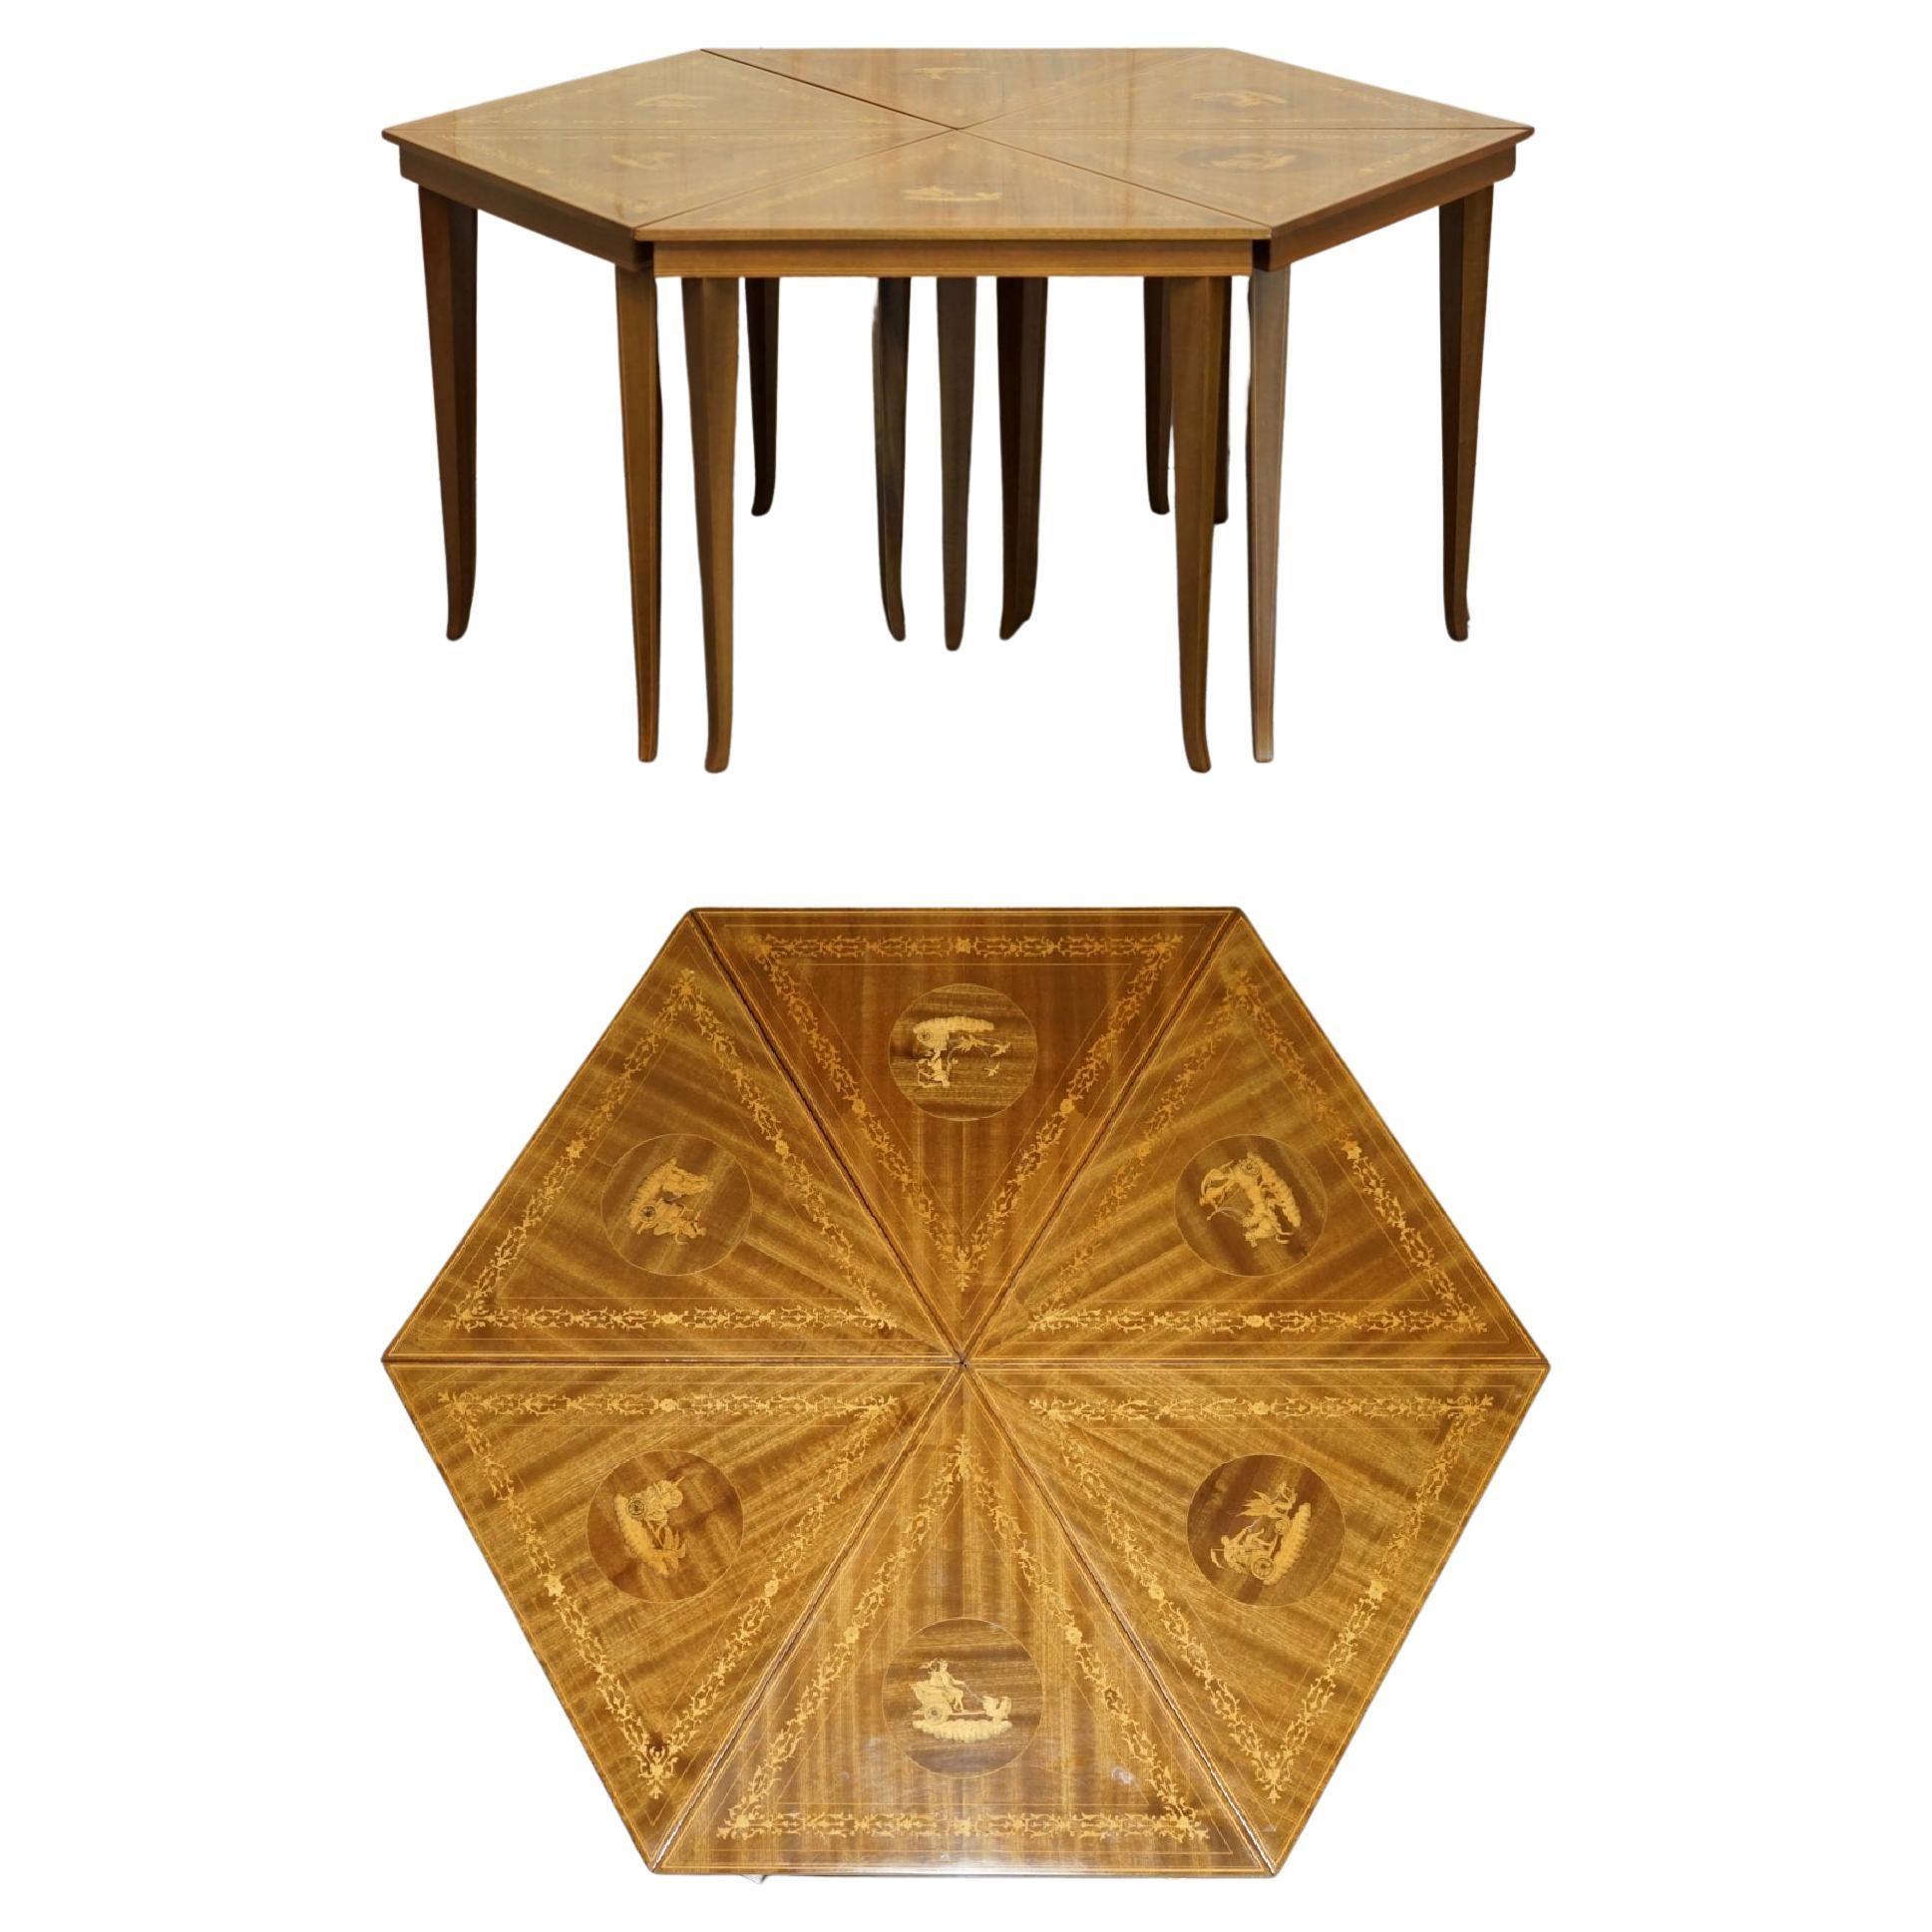 Lovely circa 1950's Vintage Italian Marquetry Inlaid Nest of Six Triangle Tables